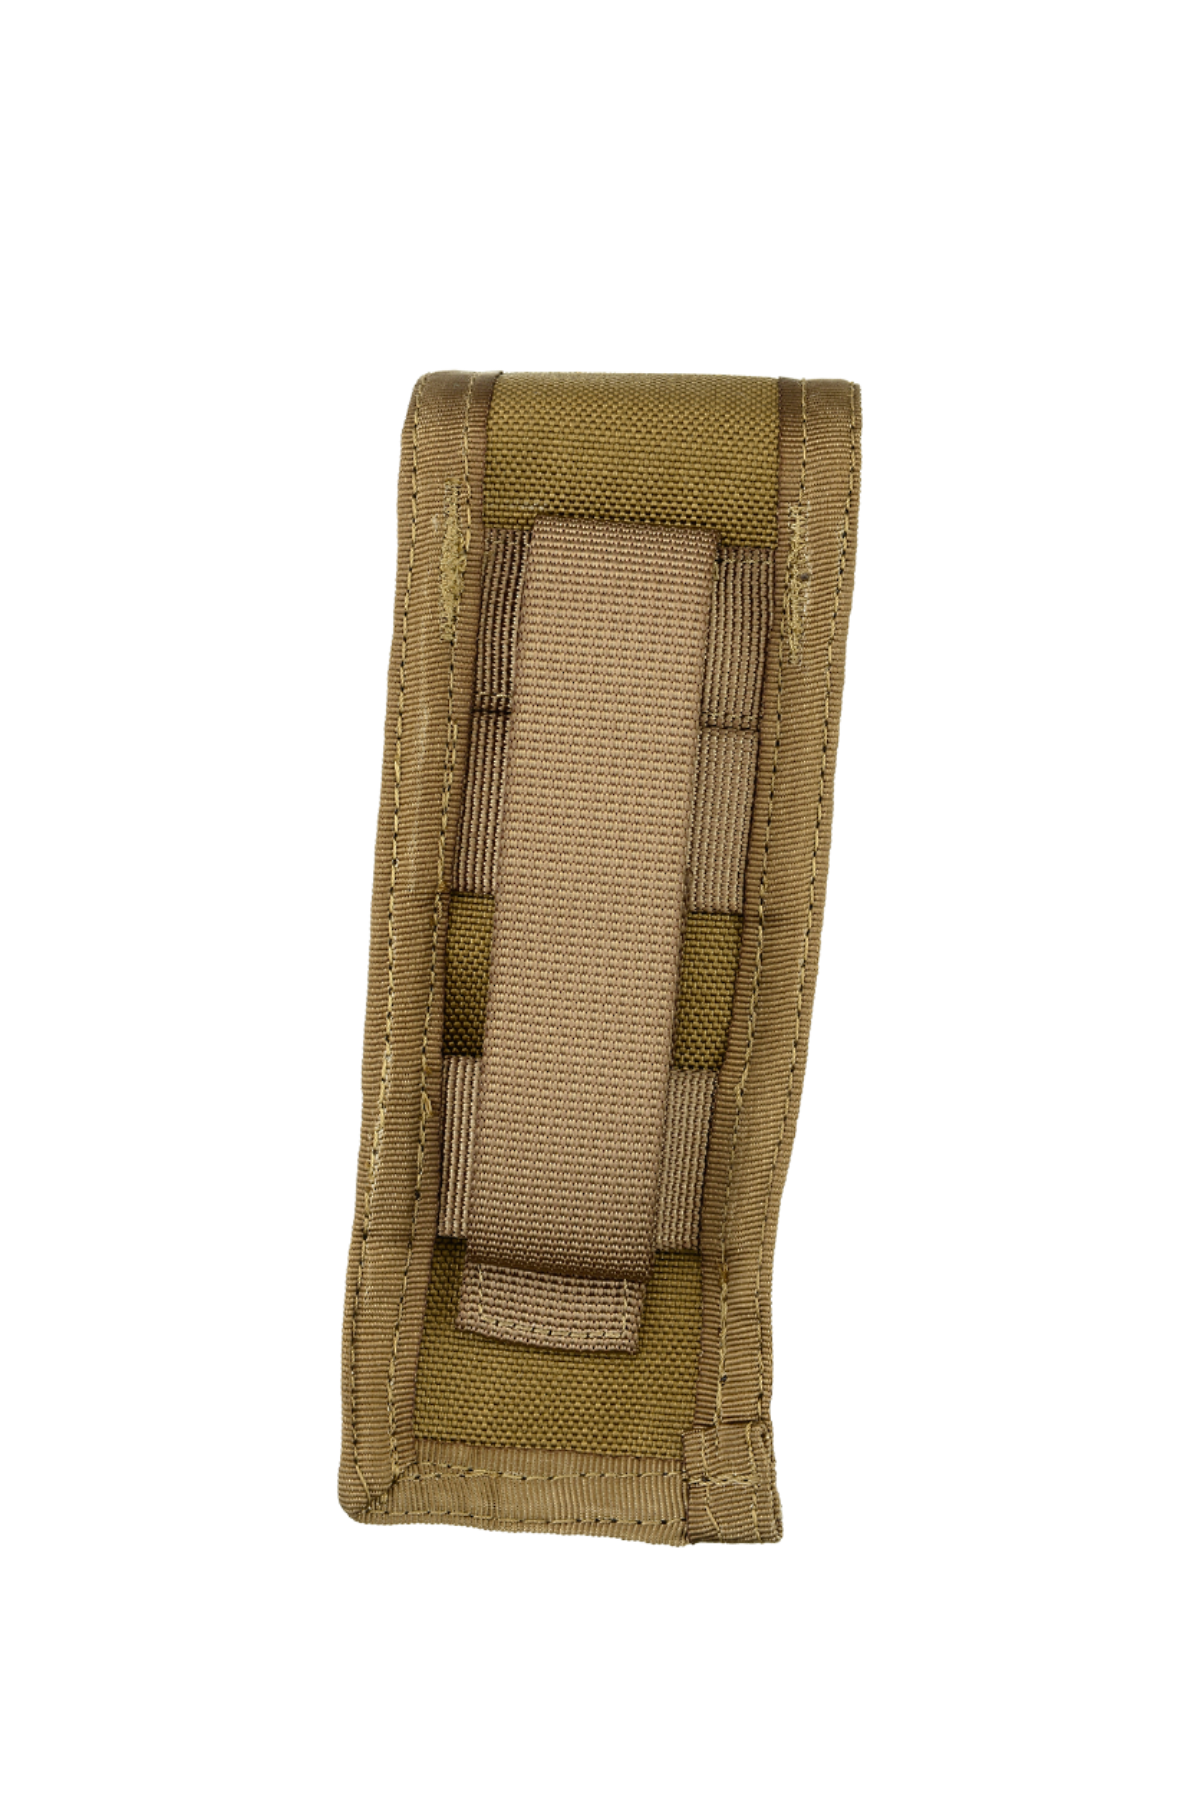 FLASHLIGHT POUCH coyote